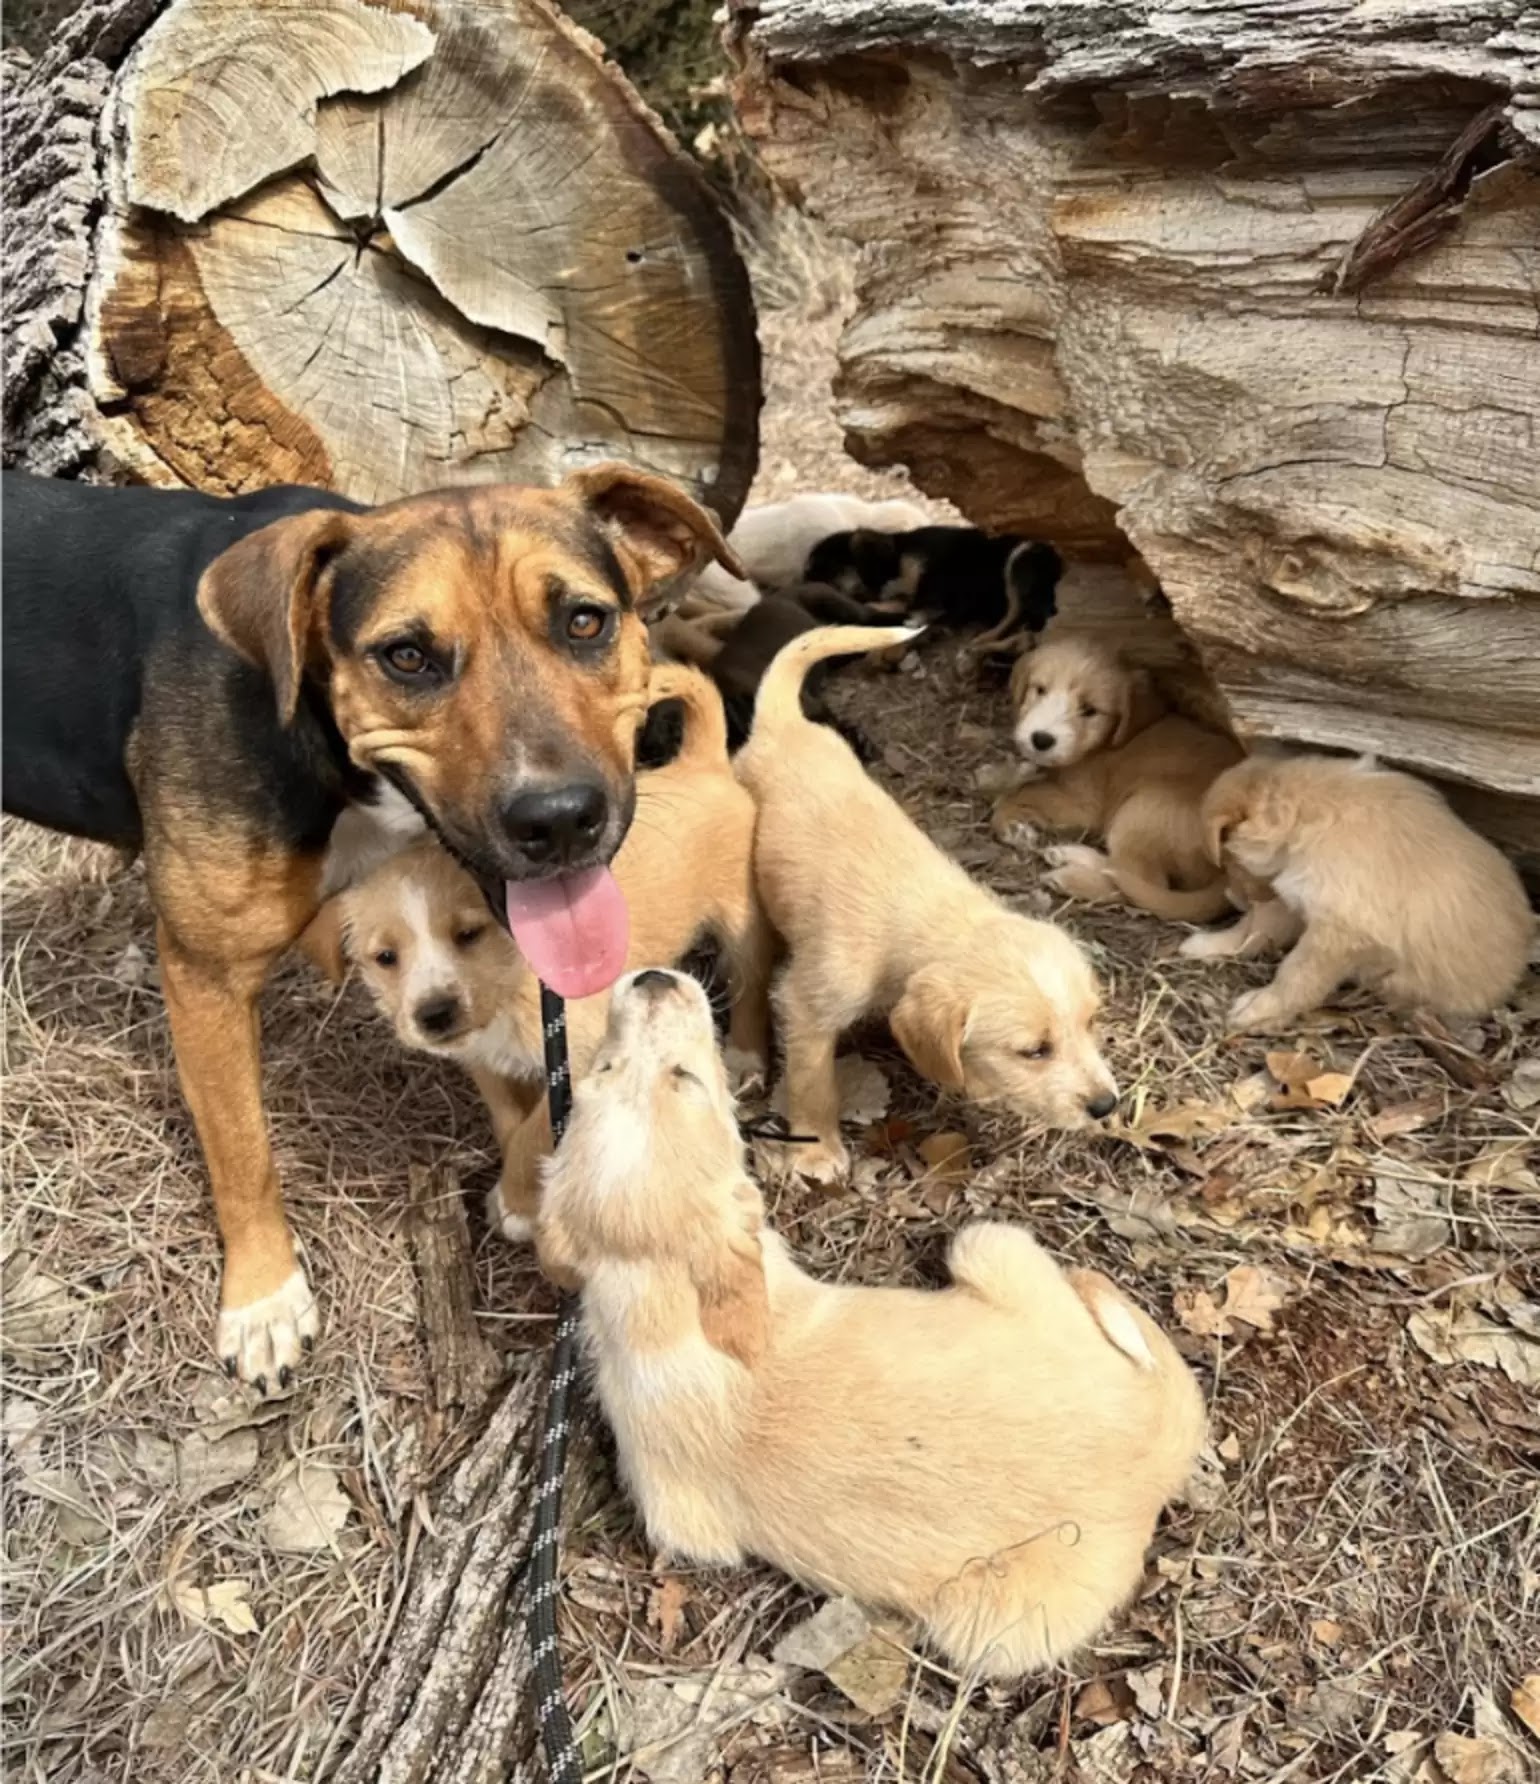 Dolly the dog and her rescued puppies